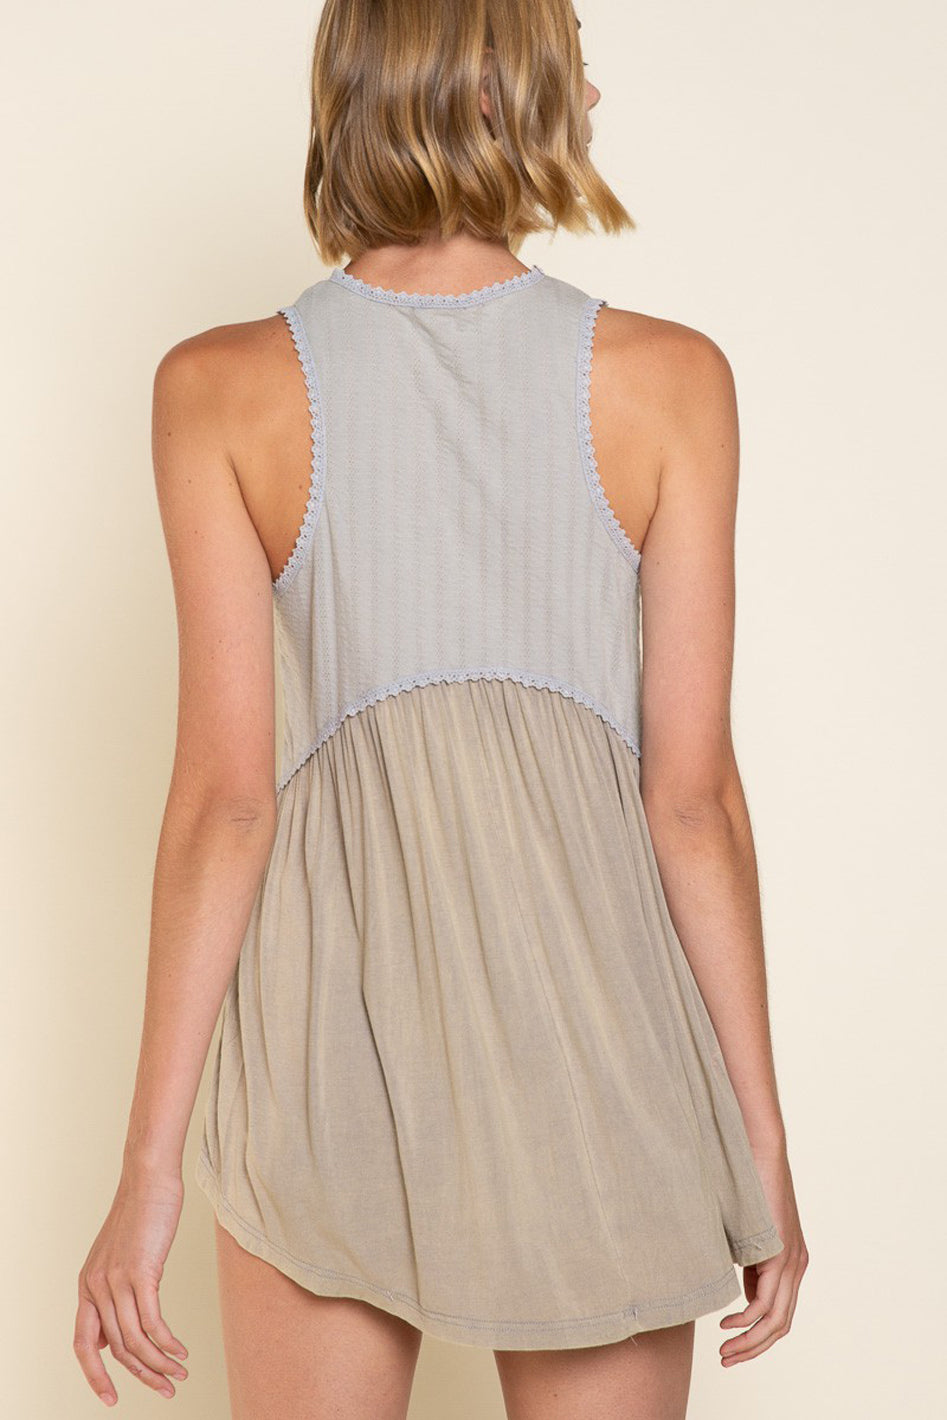 Simple But Unique Babydoll Knit Tank Top - Azoroh